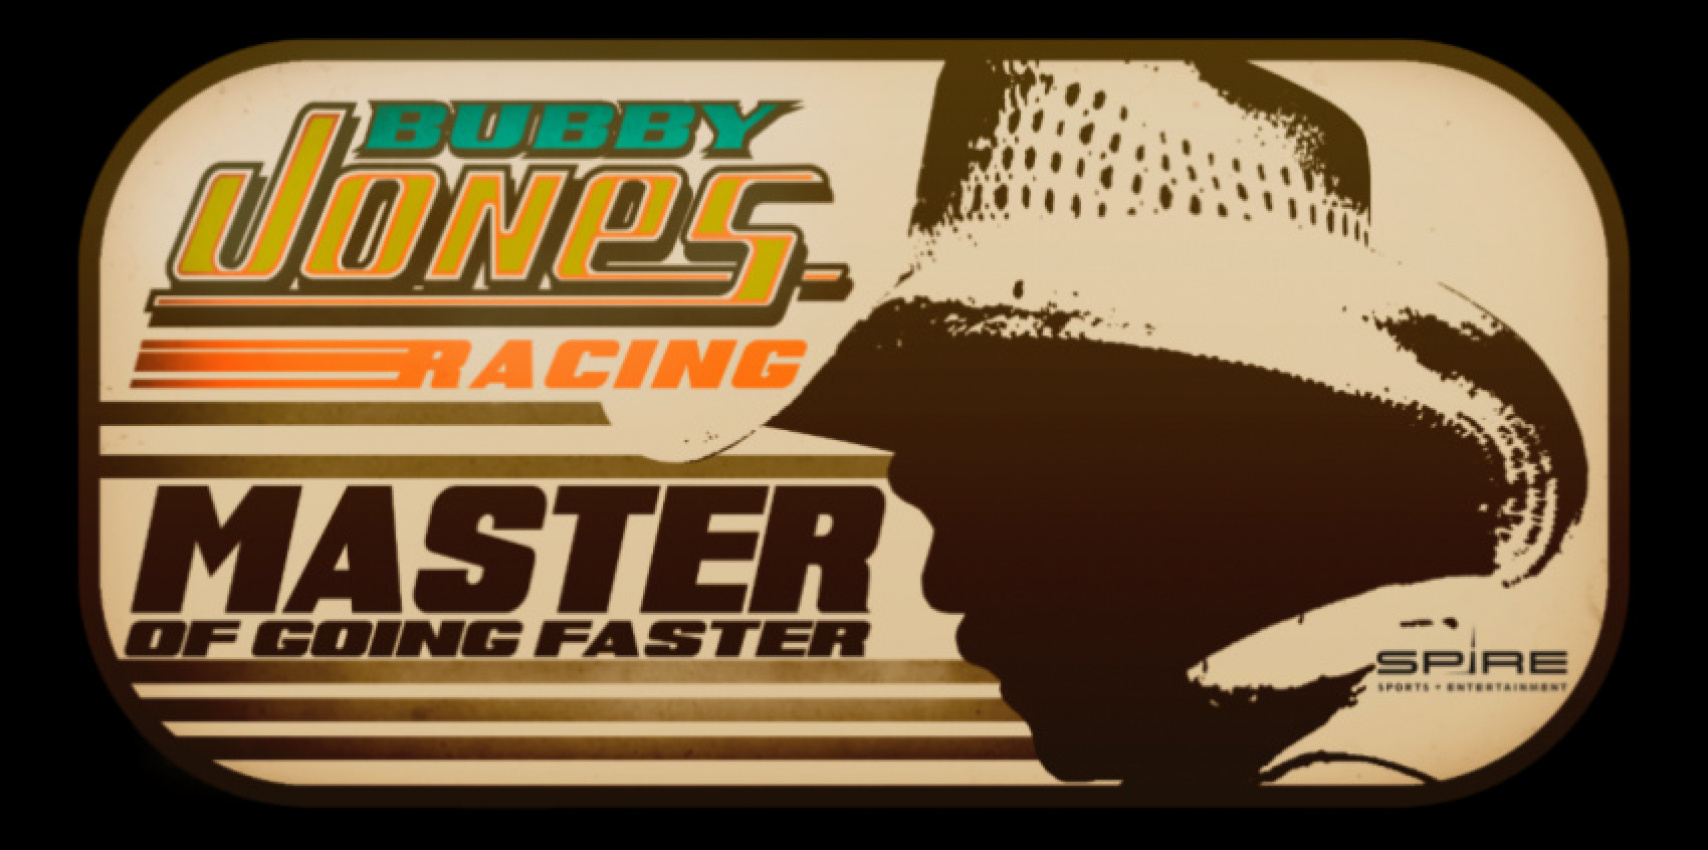 all sprints & midgets, autos, cars, usac reveals bubby jones master of going faster series